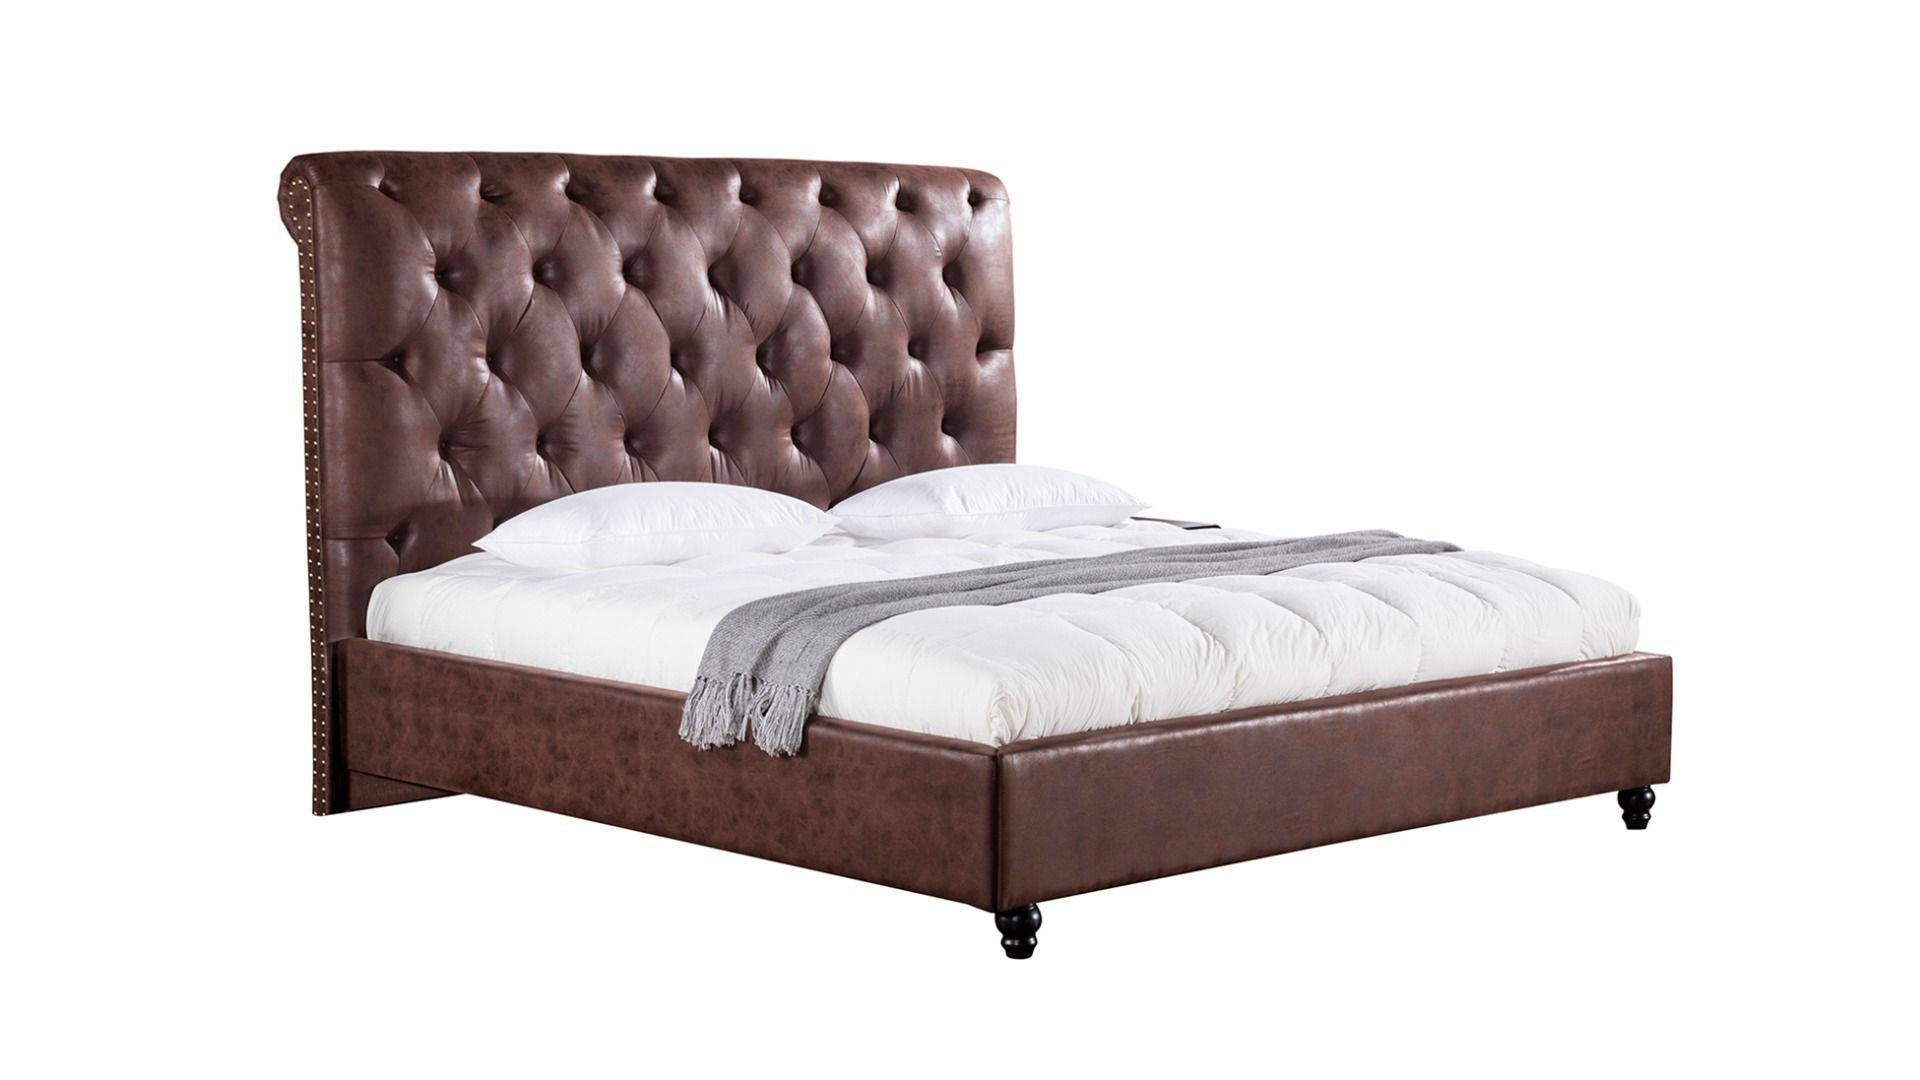 

    
Brown Leather Air King Size Bed Tufted Headboard American Eagle B-D061
